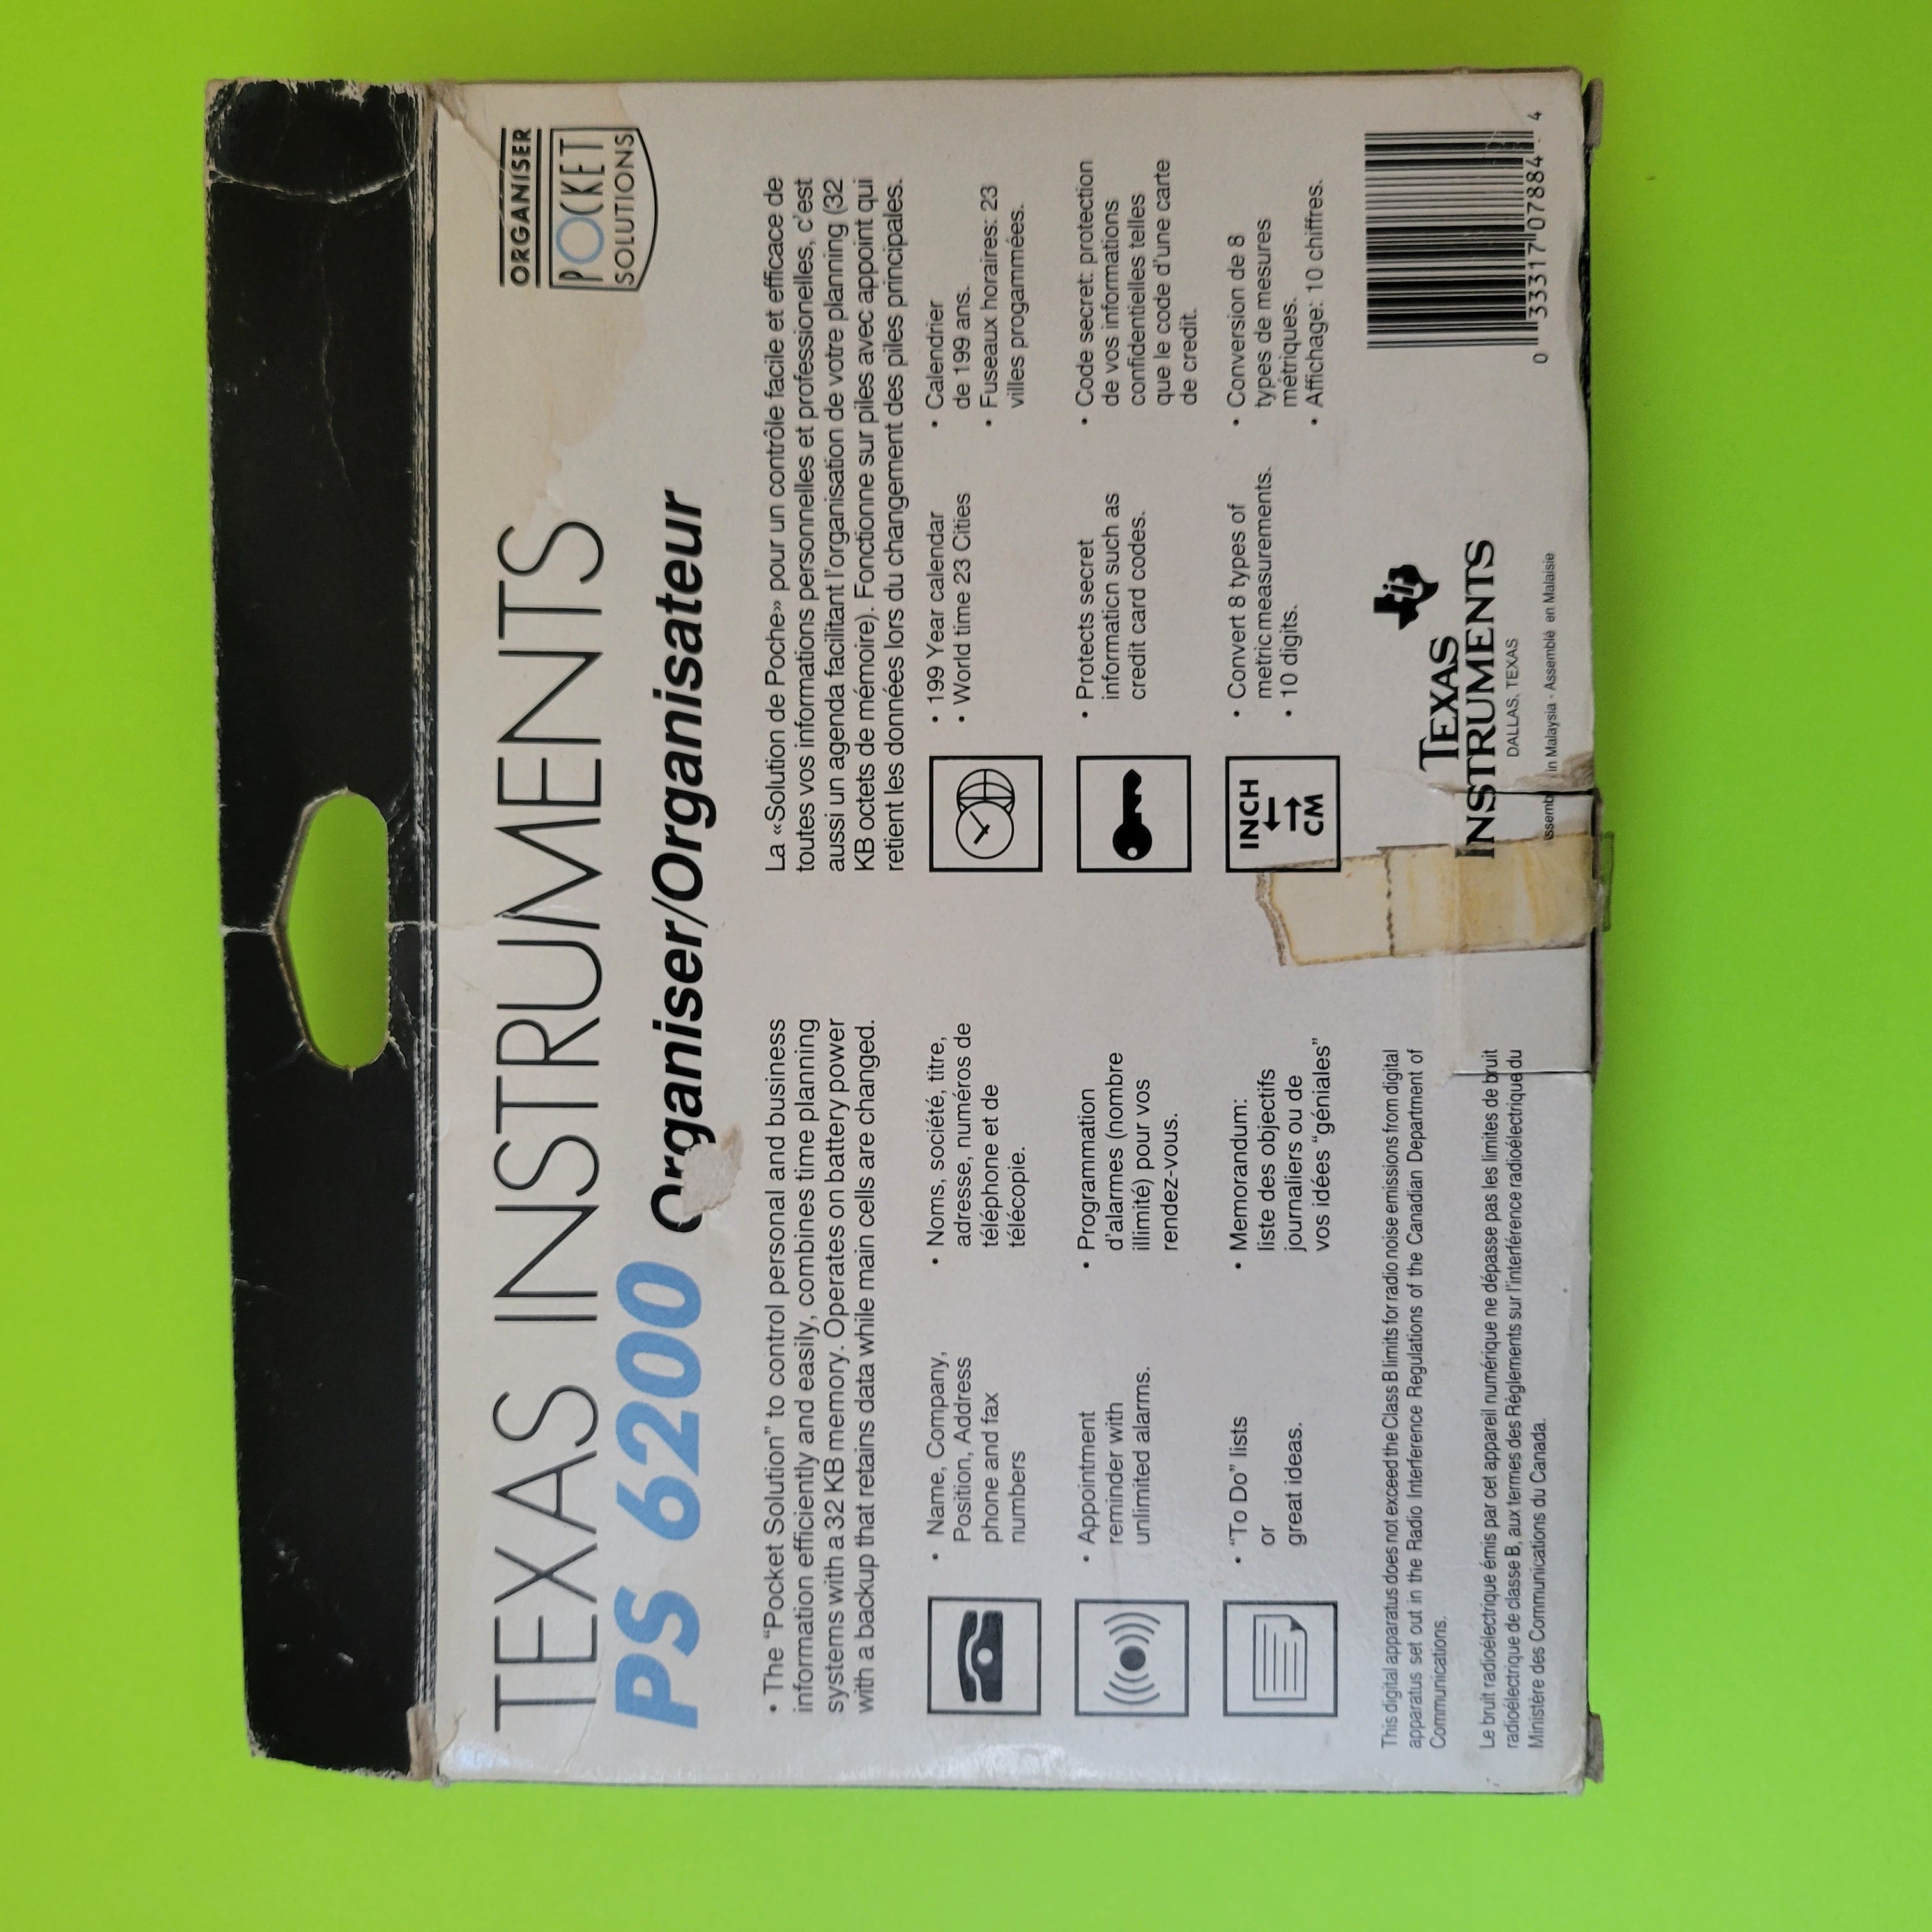 An image of the back of the box of a Texas Instruments PS-6200 personal organizer